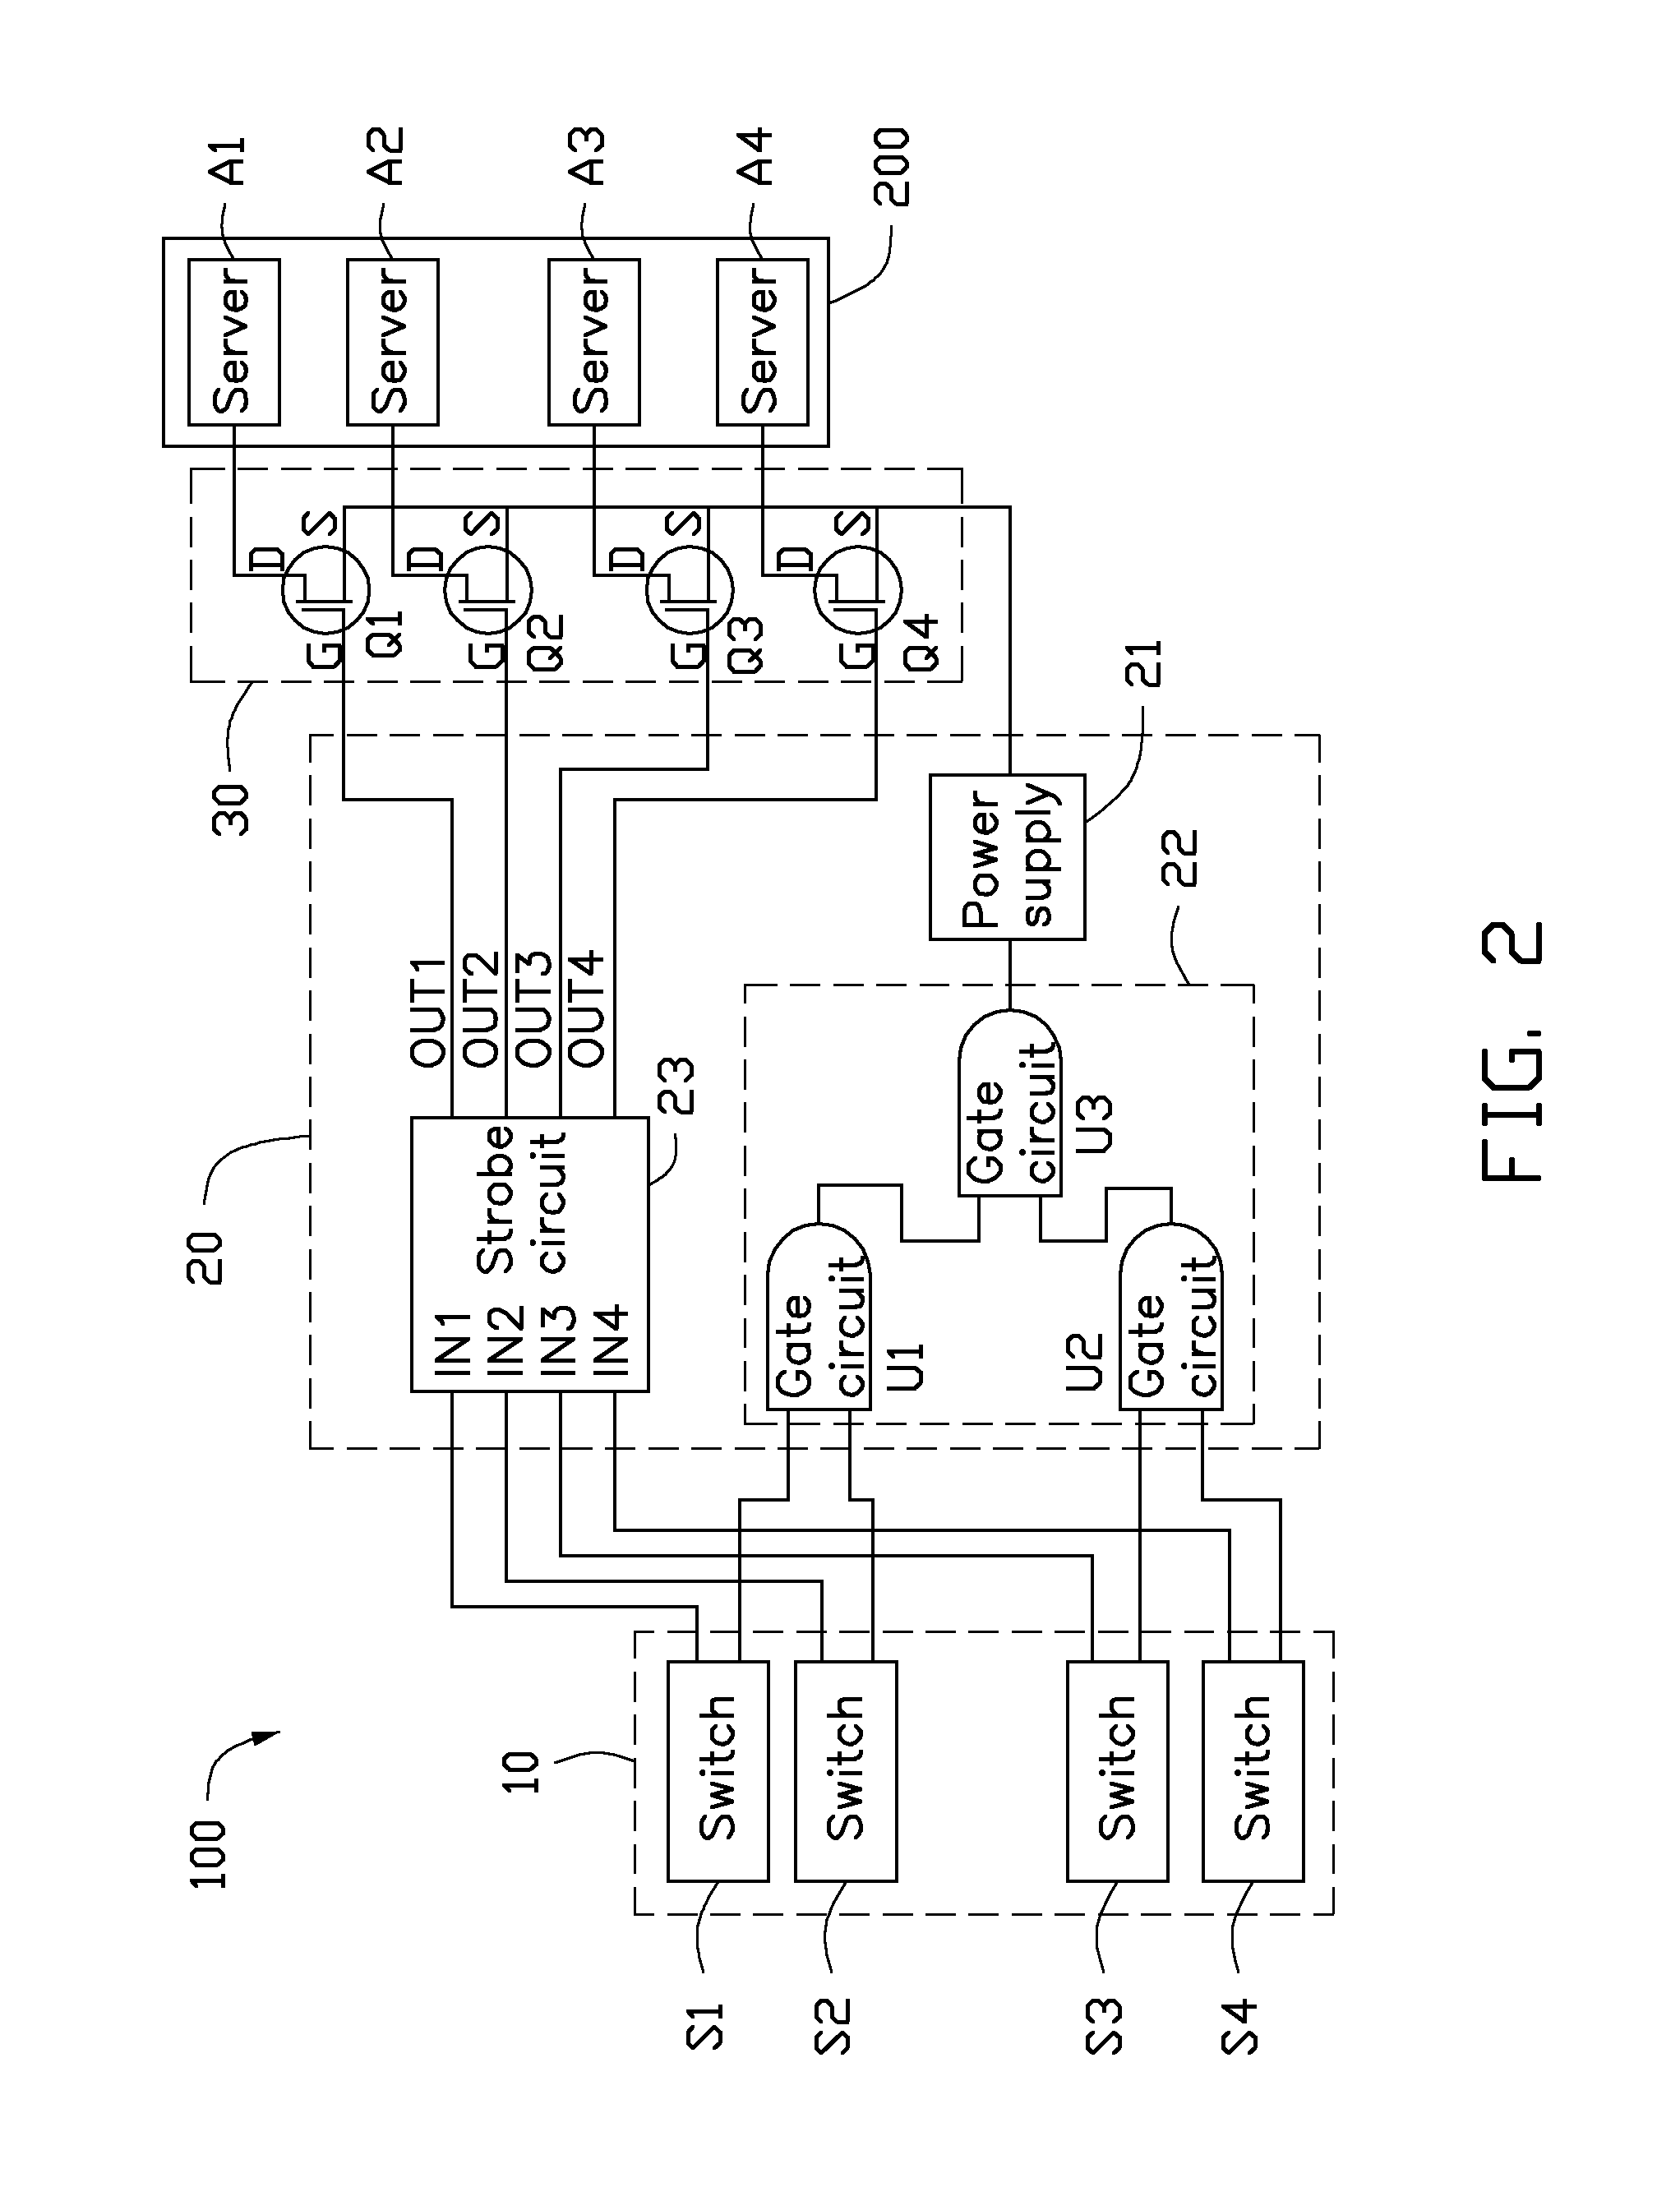 Power supply device for computer systems